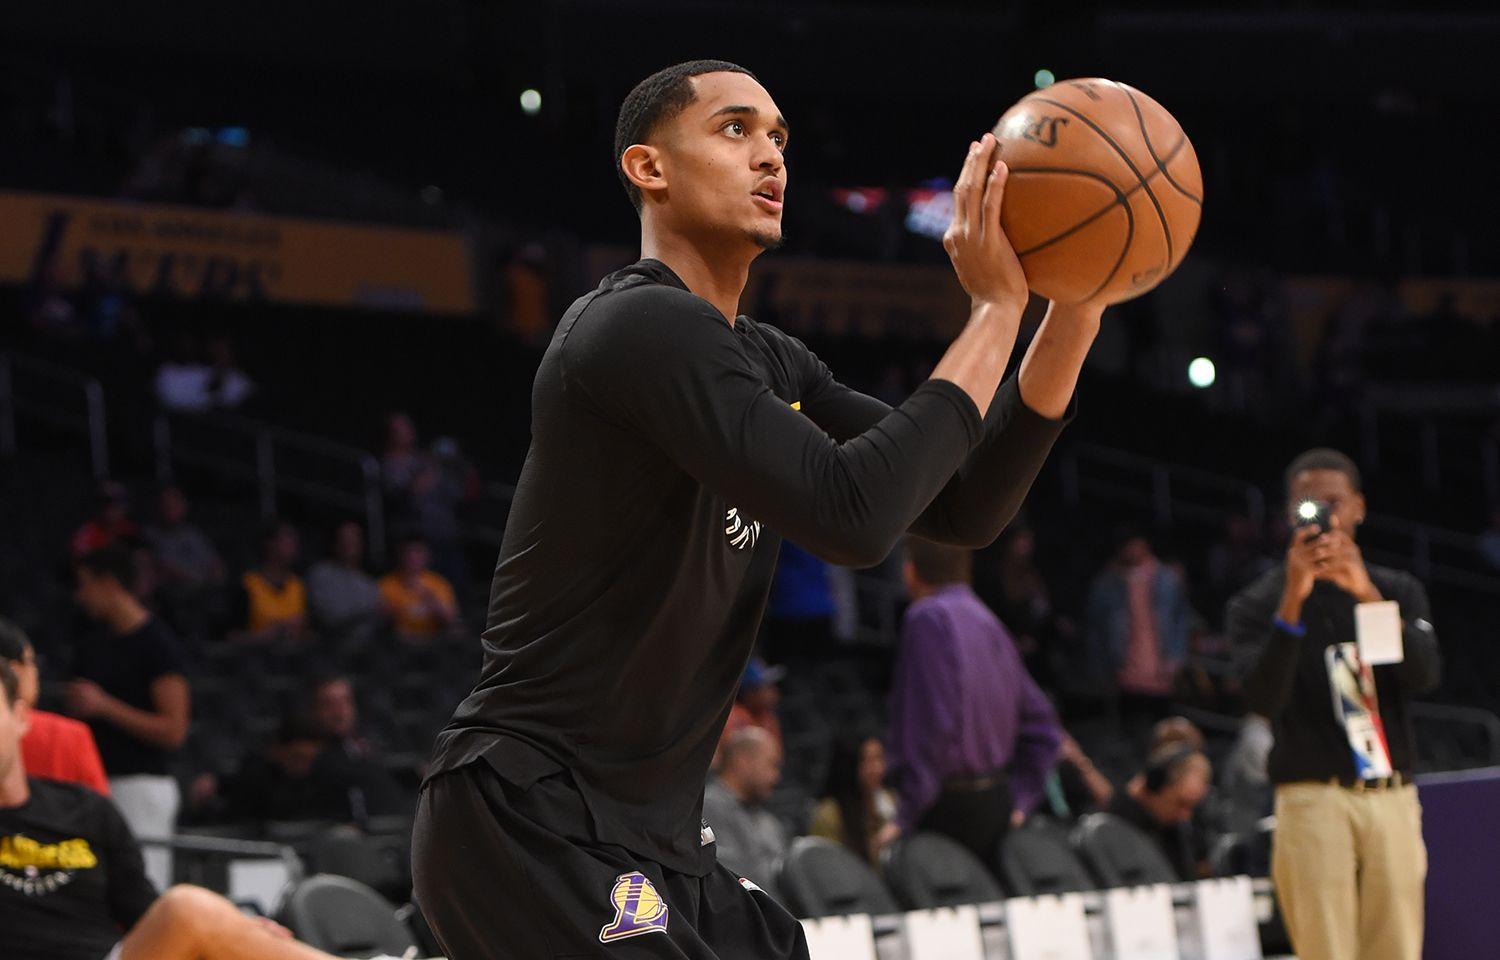 Facts and Stats About Jordan Clarkson